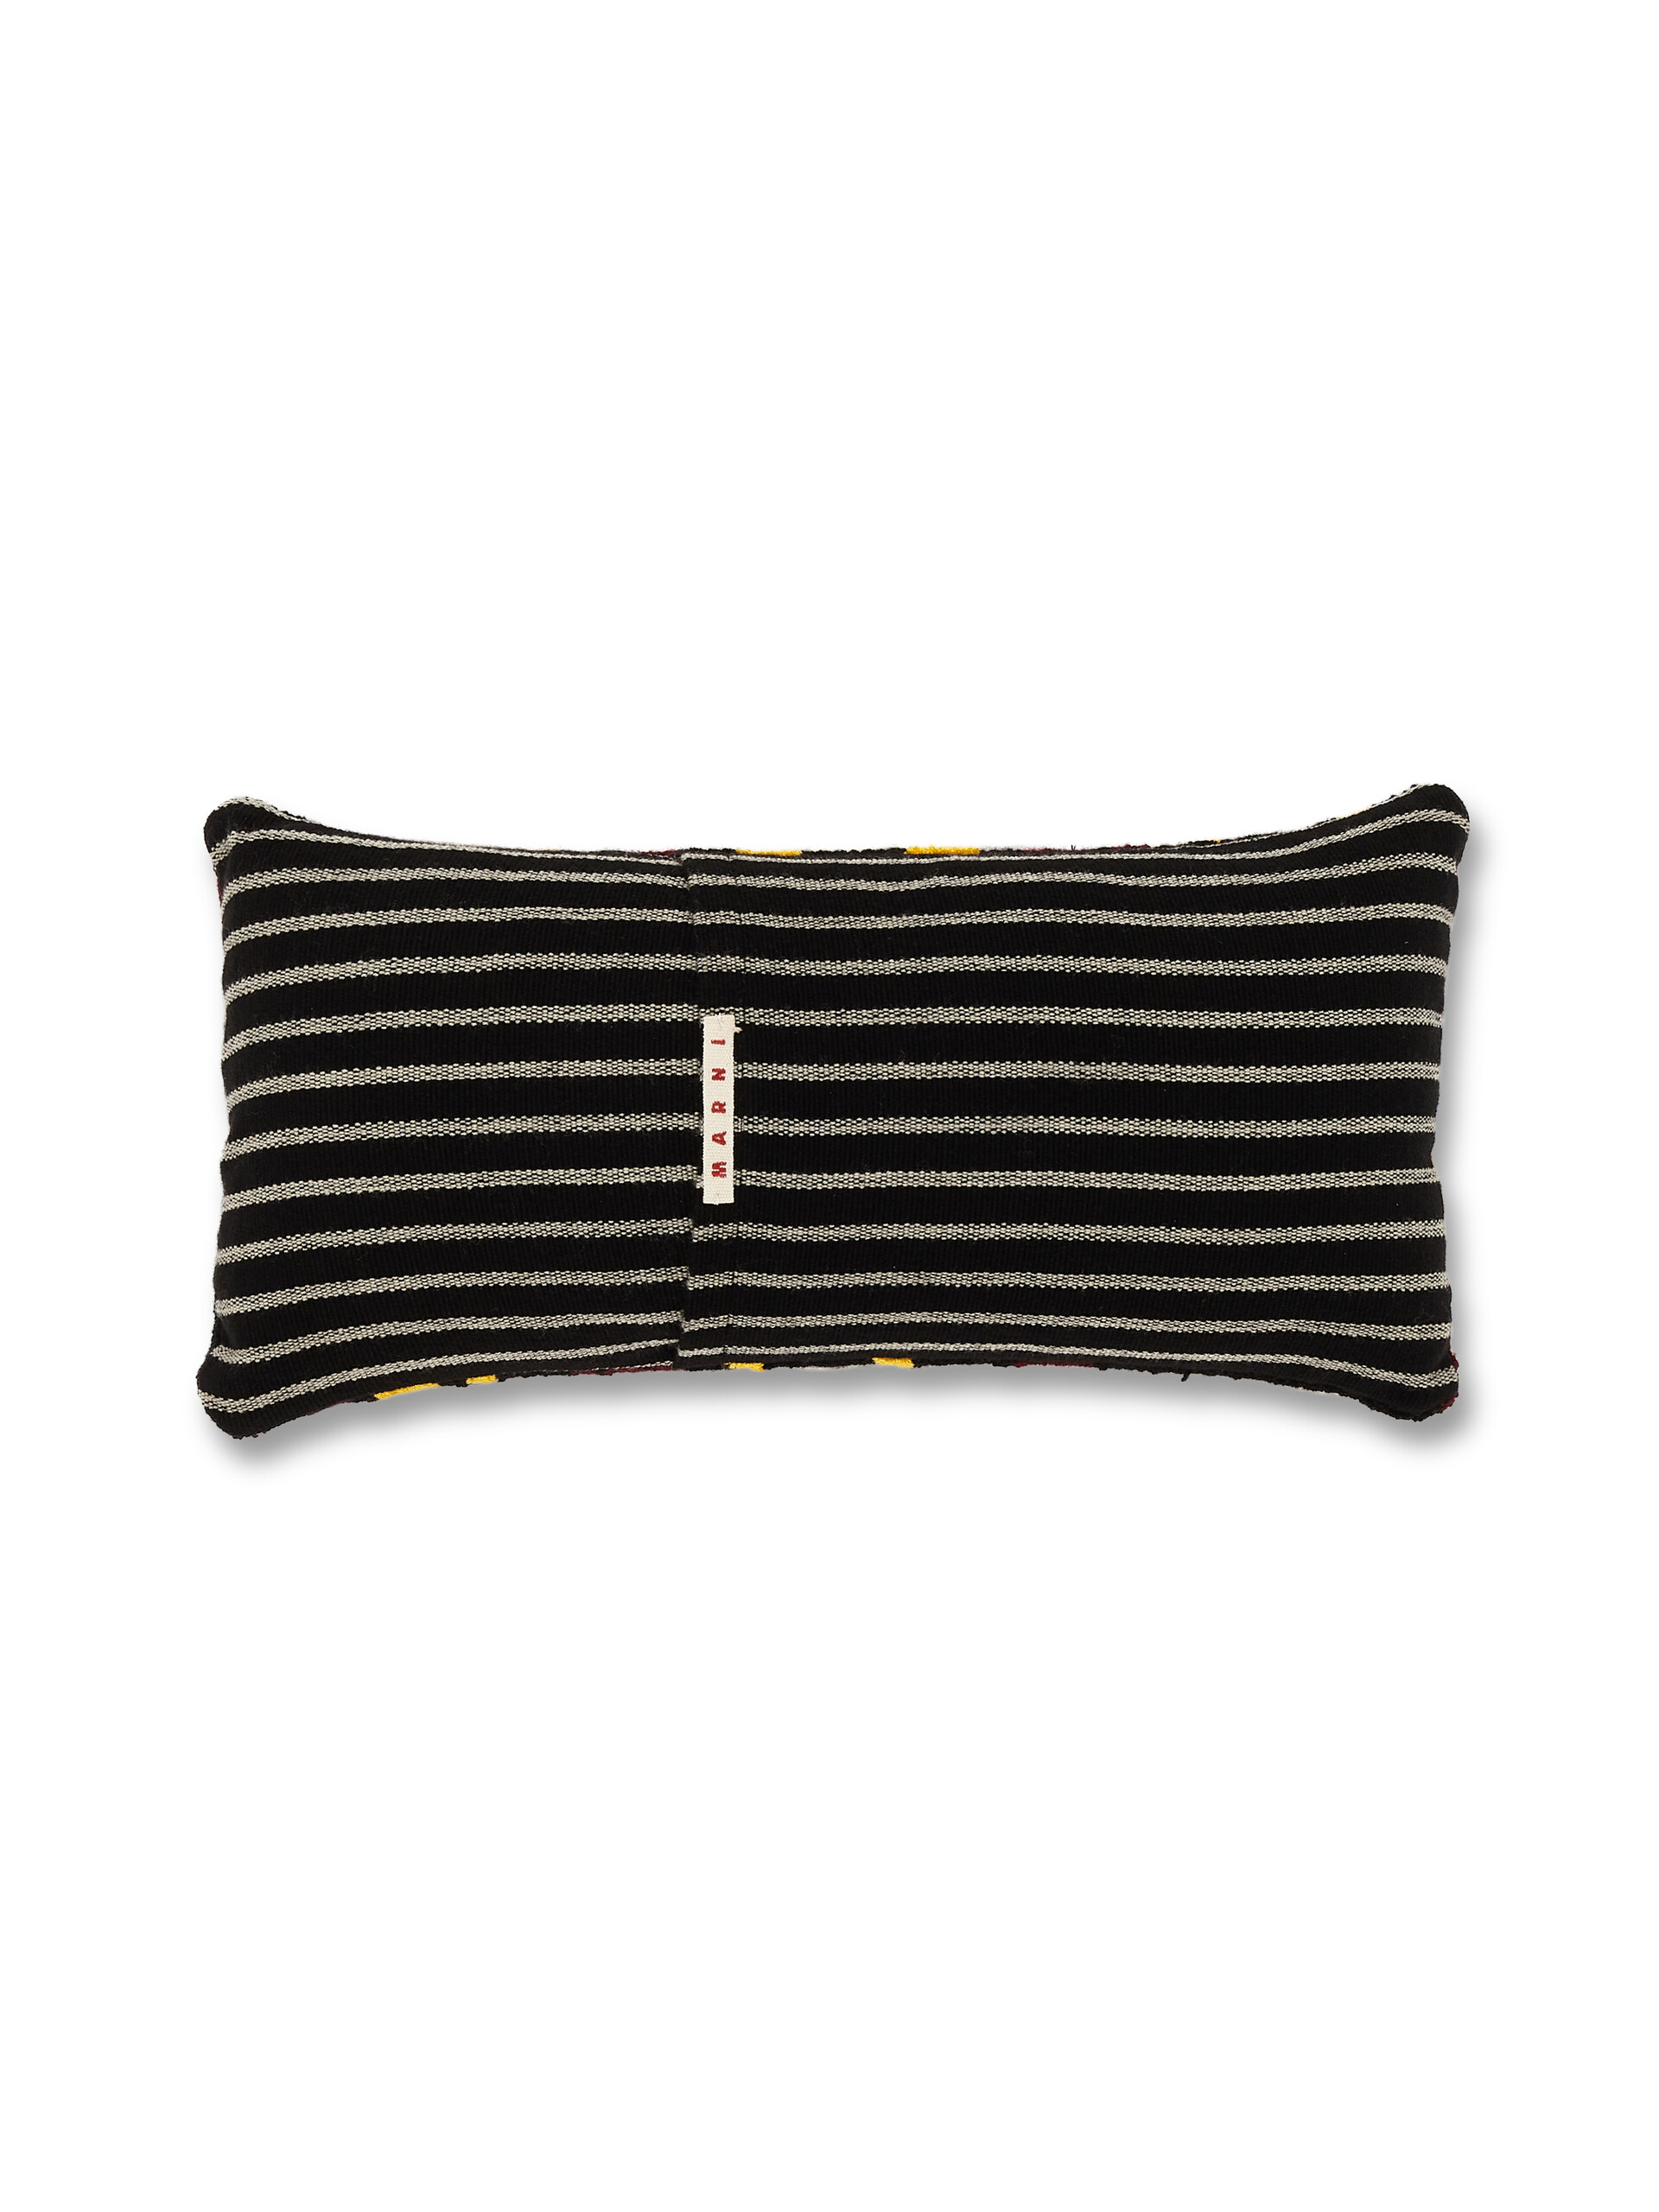 MARNI MARKET cushion in black fabric with flower motif - Furniture - Image 2